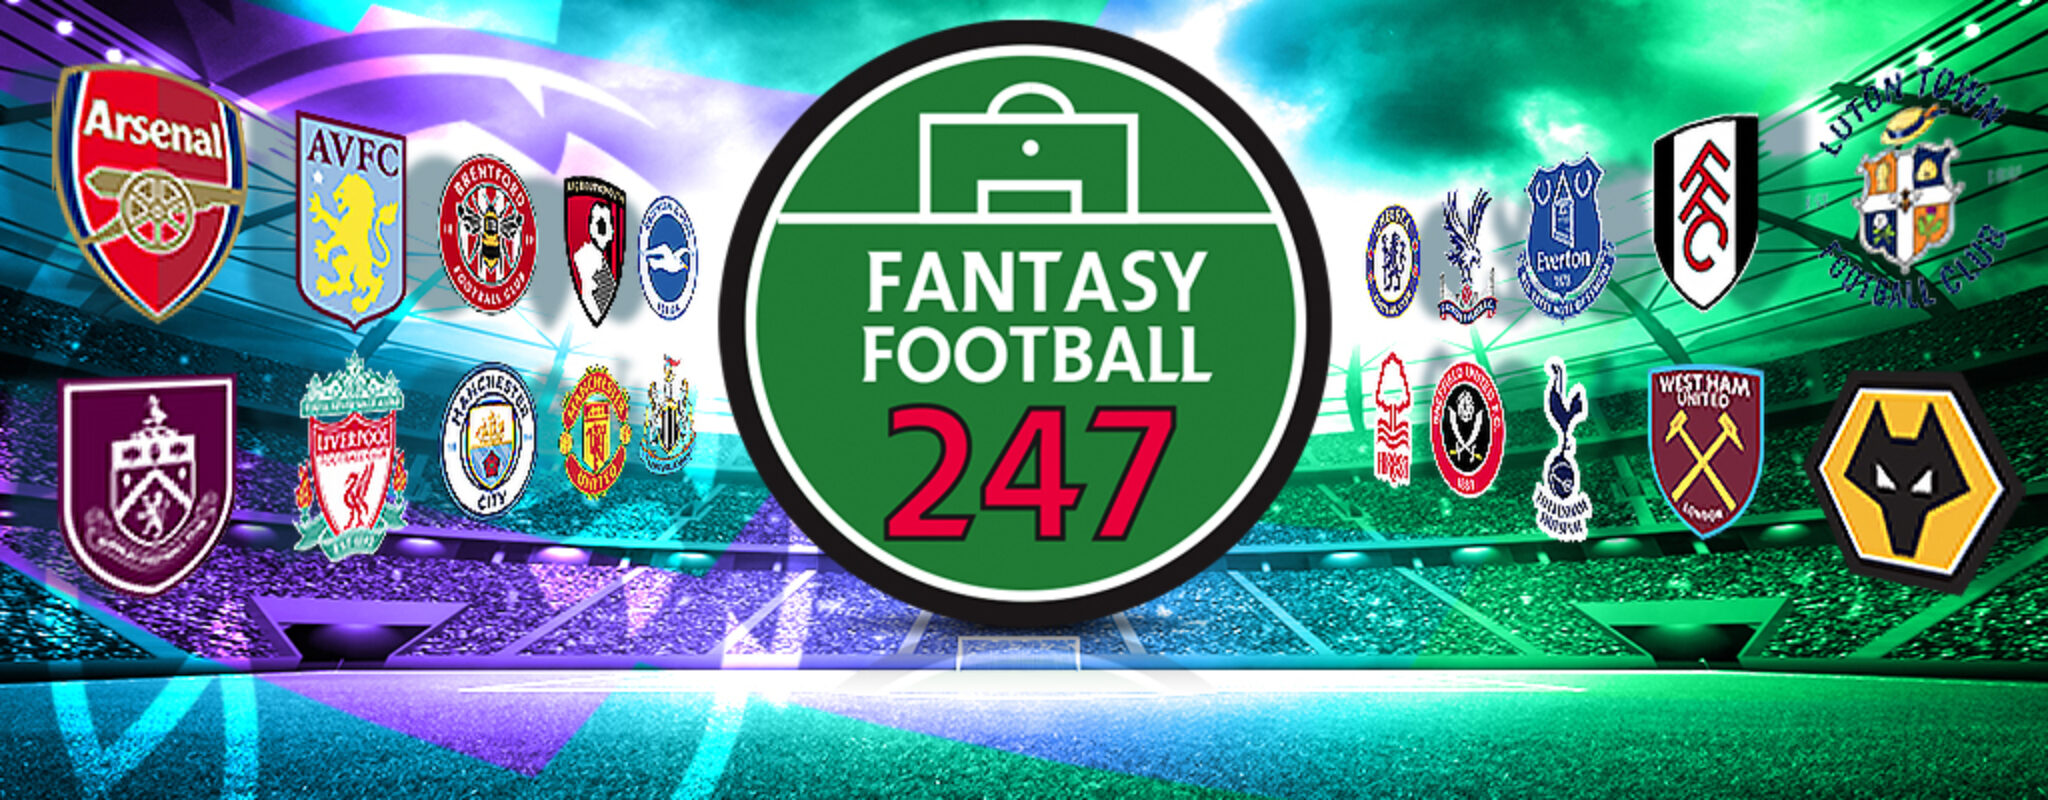 Fantasy Football Hub: FPL Tips for Android - Free App Download